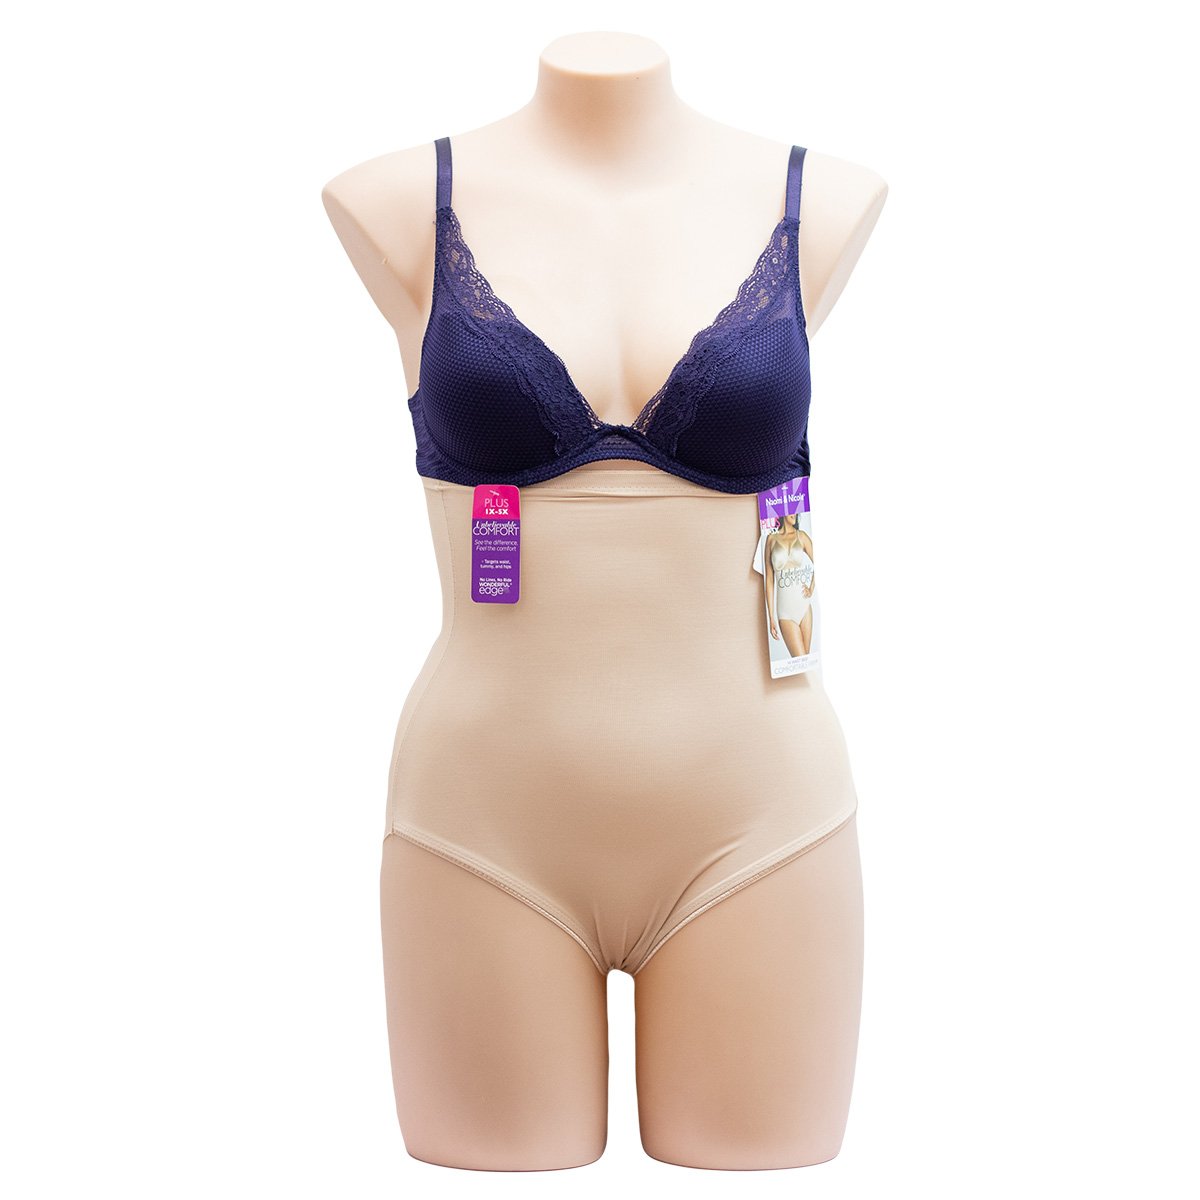 Naomi & Nicole Hi Waist Brief Comfortable Firm 7775 - Shapewear Nude / 16 / XL  Available at Illusions Lingerie